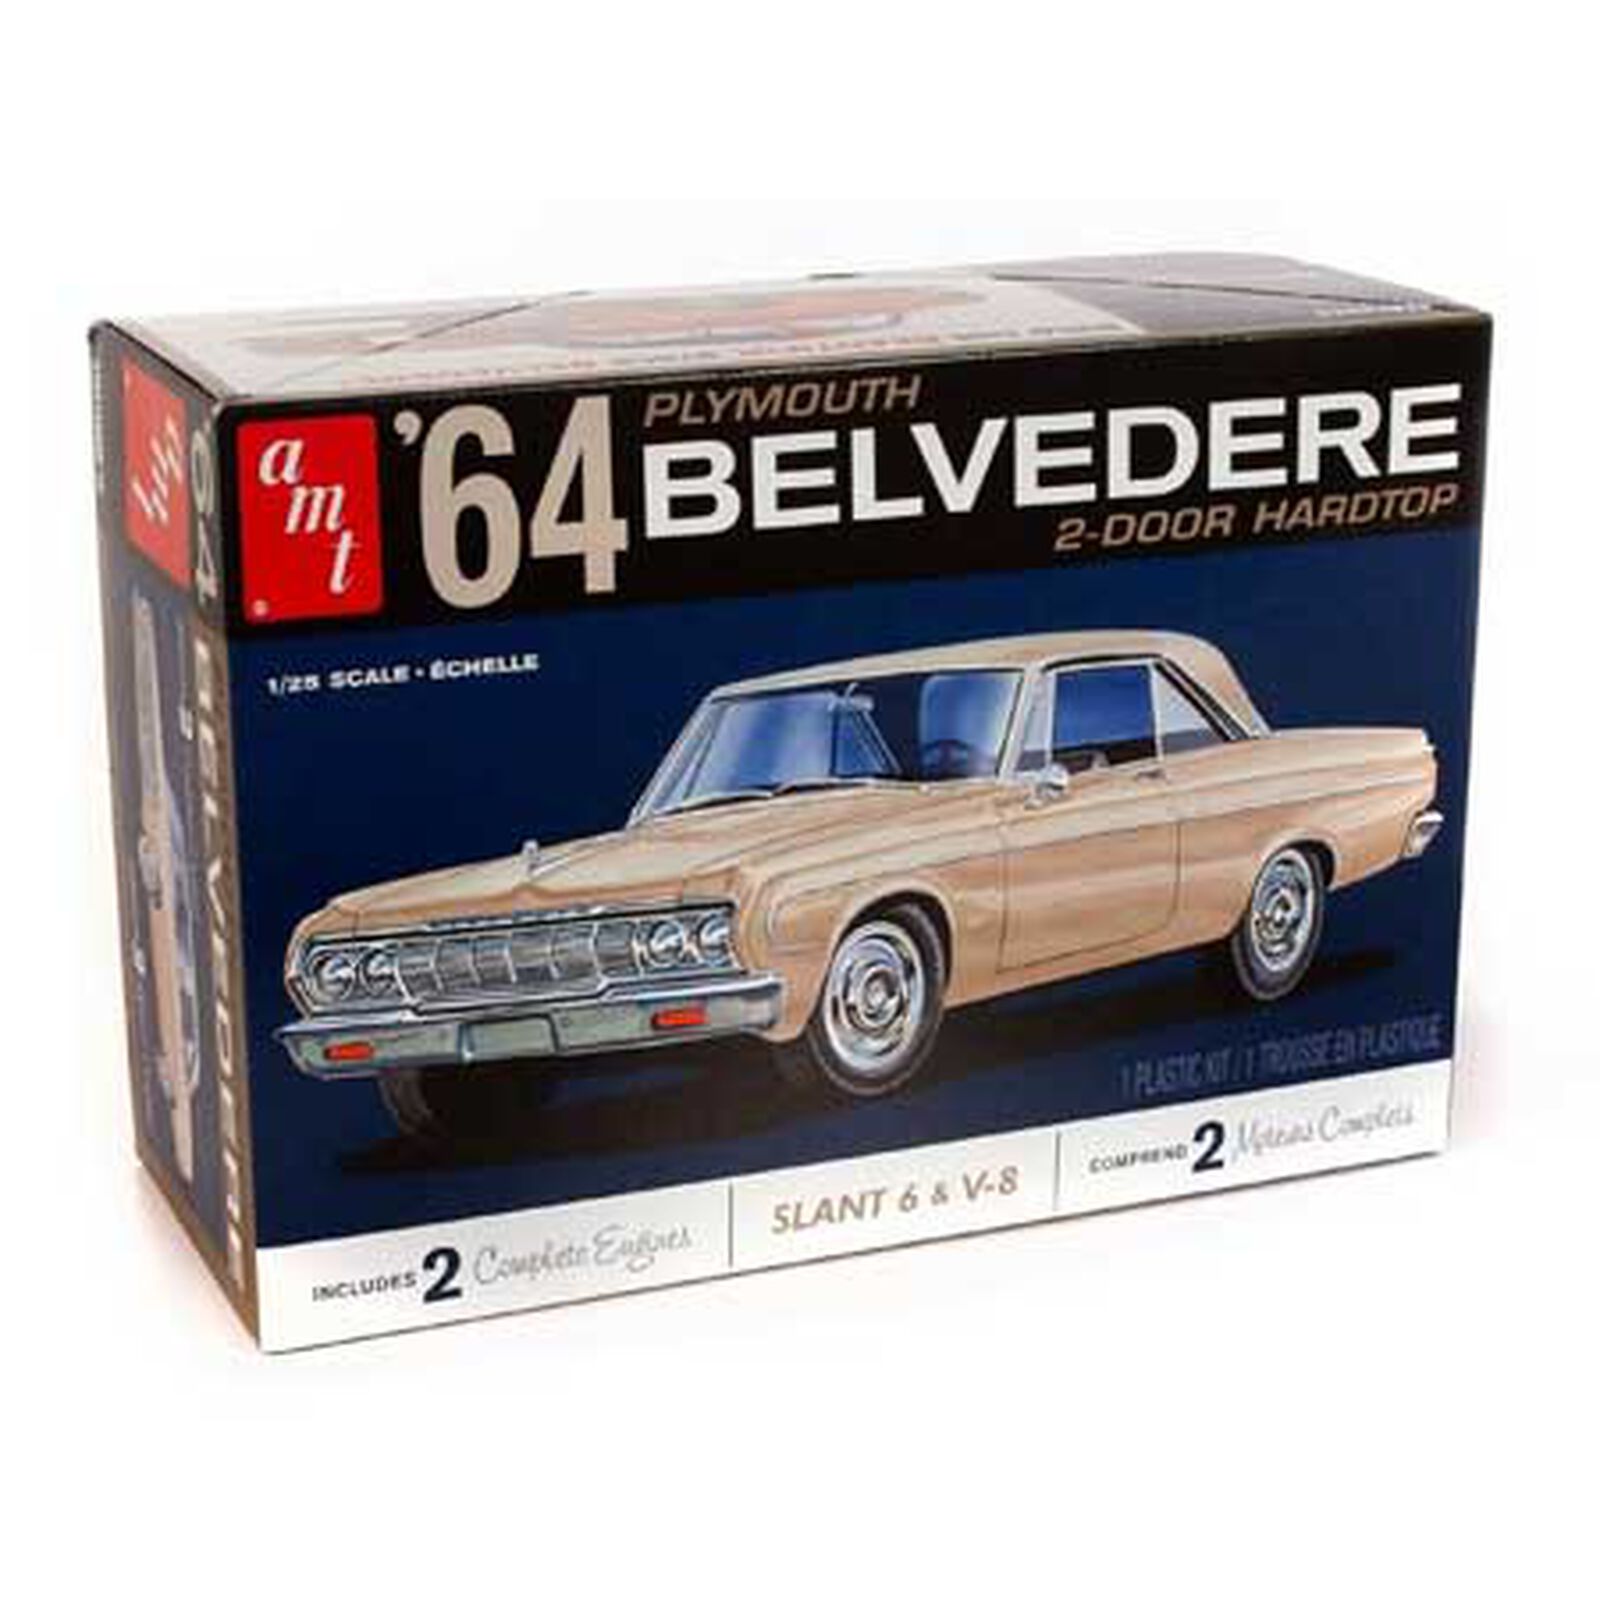 1/25 1964 Plymouth Belvedere with Straight 6 Engine